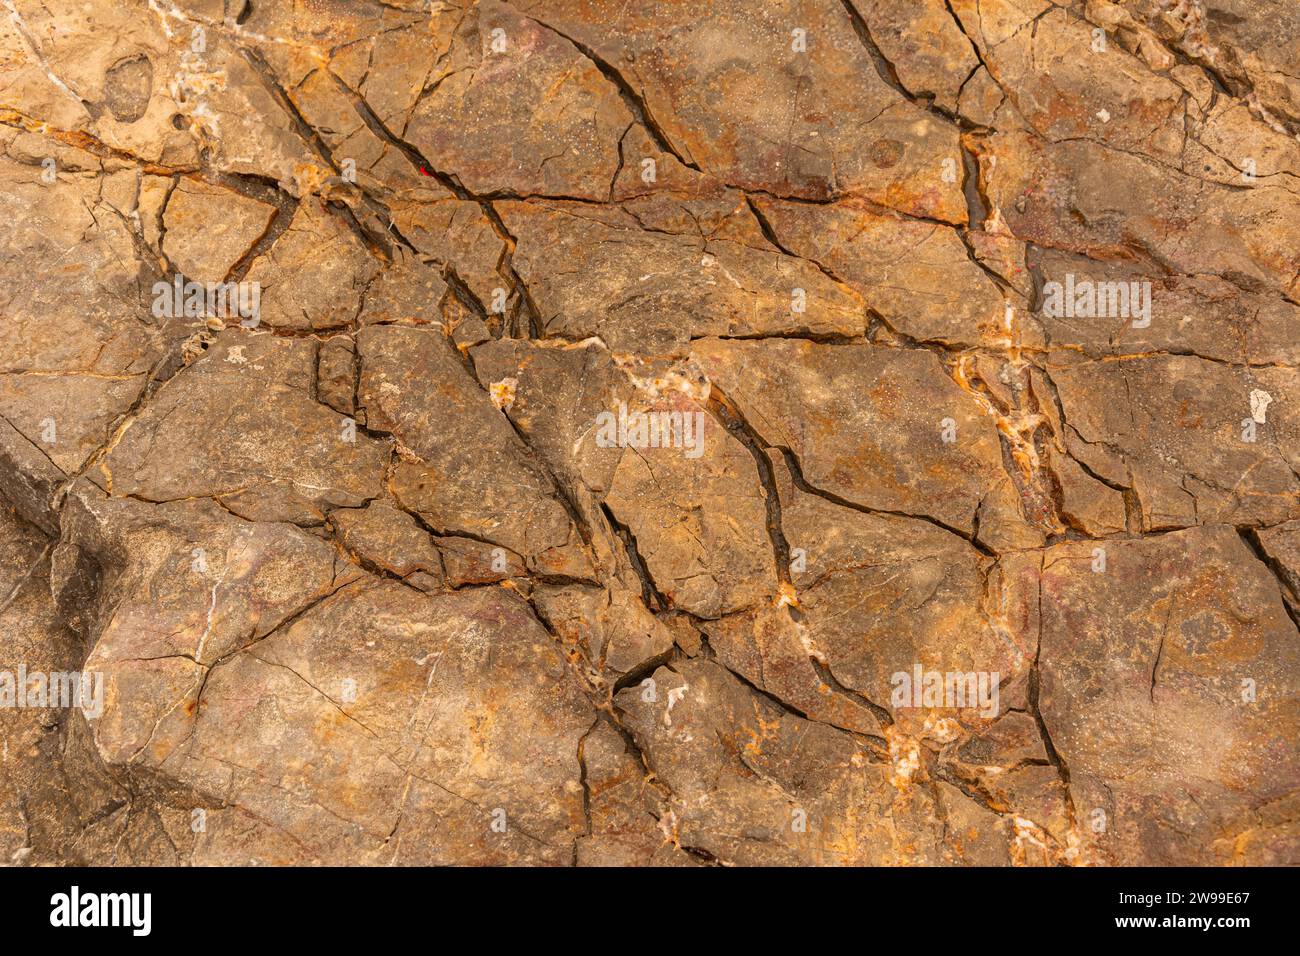 Textured rock surface produced by water and wind erosion Stock Photo